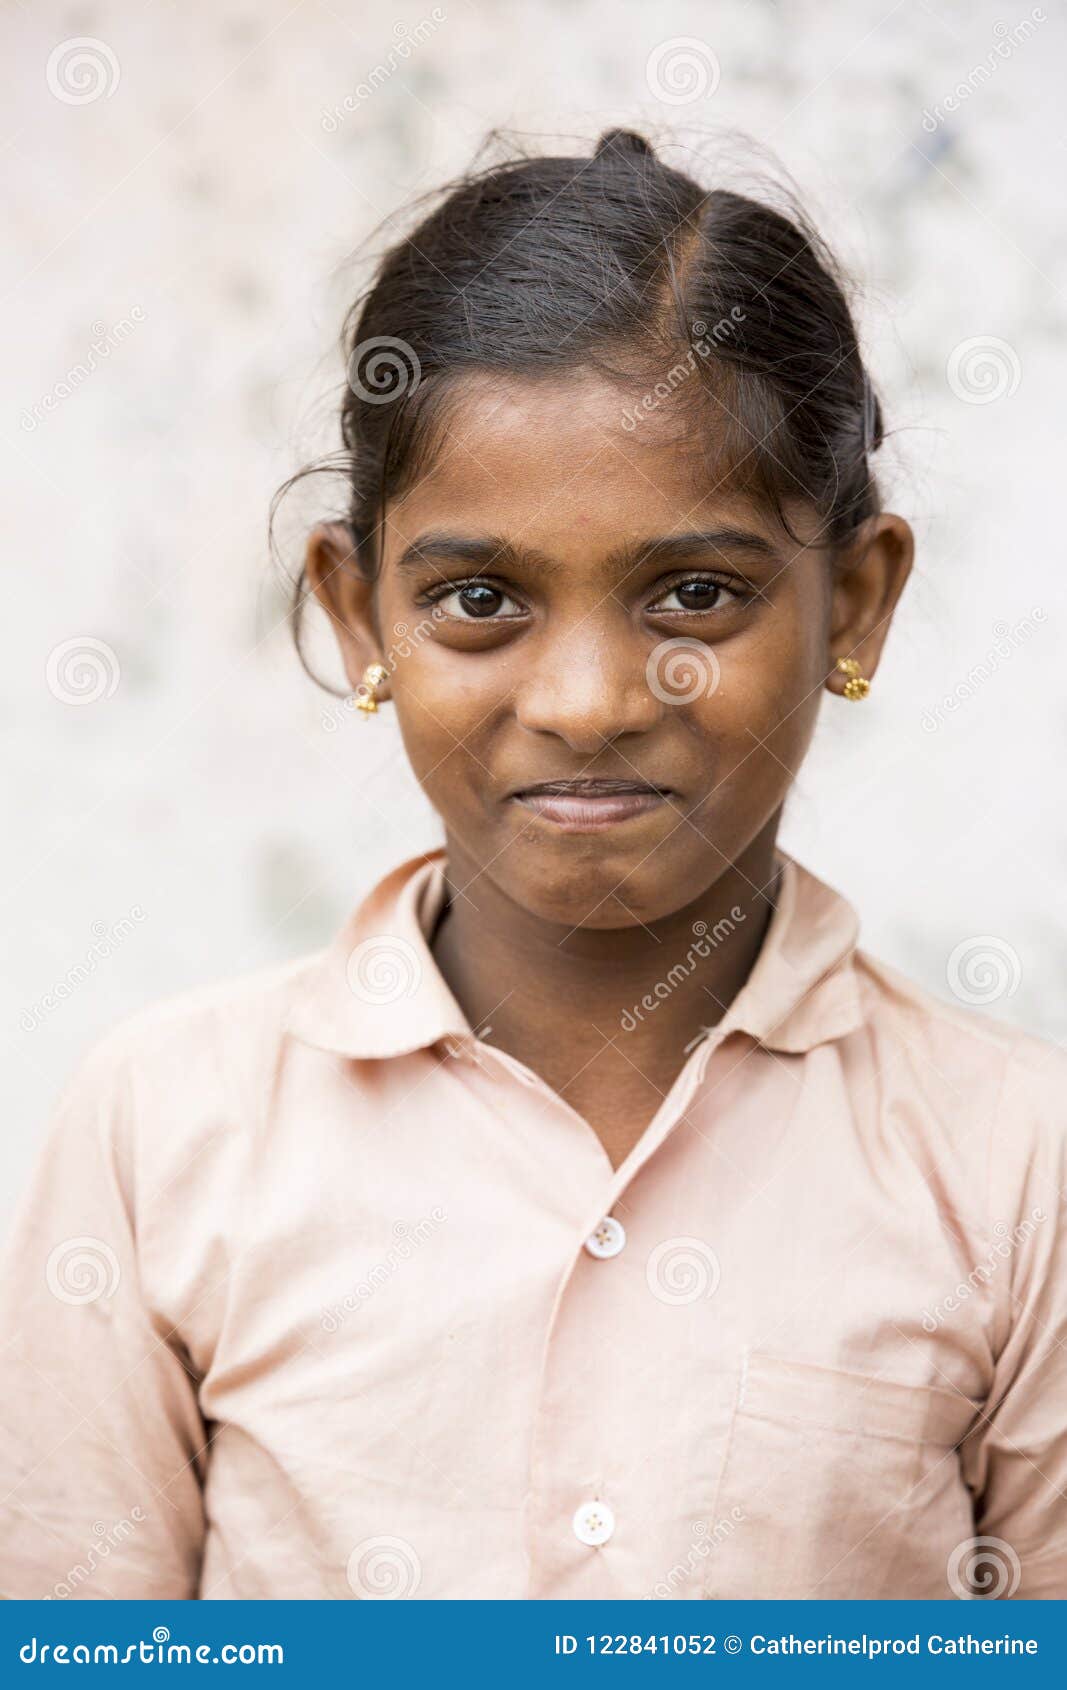 An Unidentified Poor Girl in a Small Village Looking at the Camera  Editorial Photography - Image of indigenous, child: 122841052